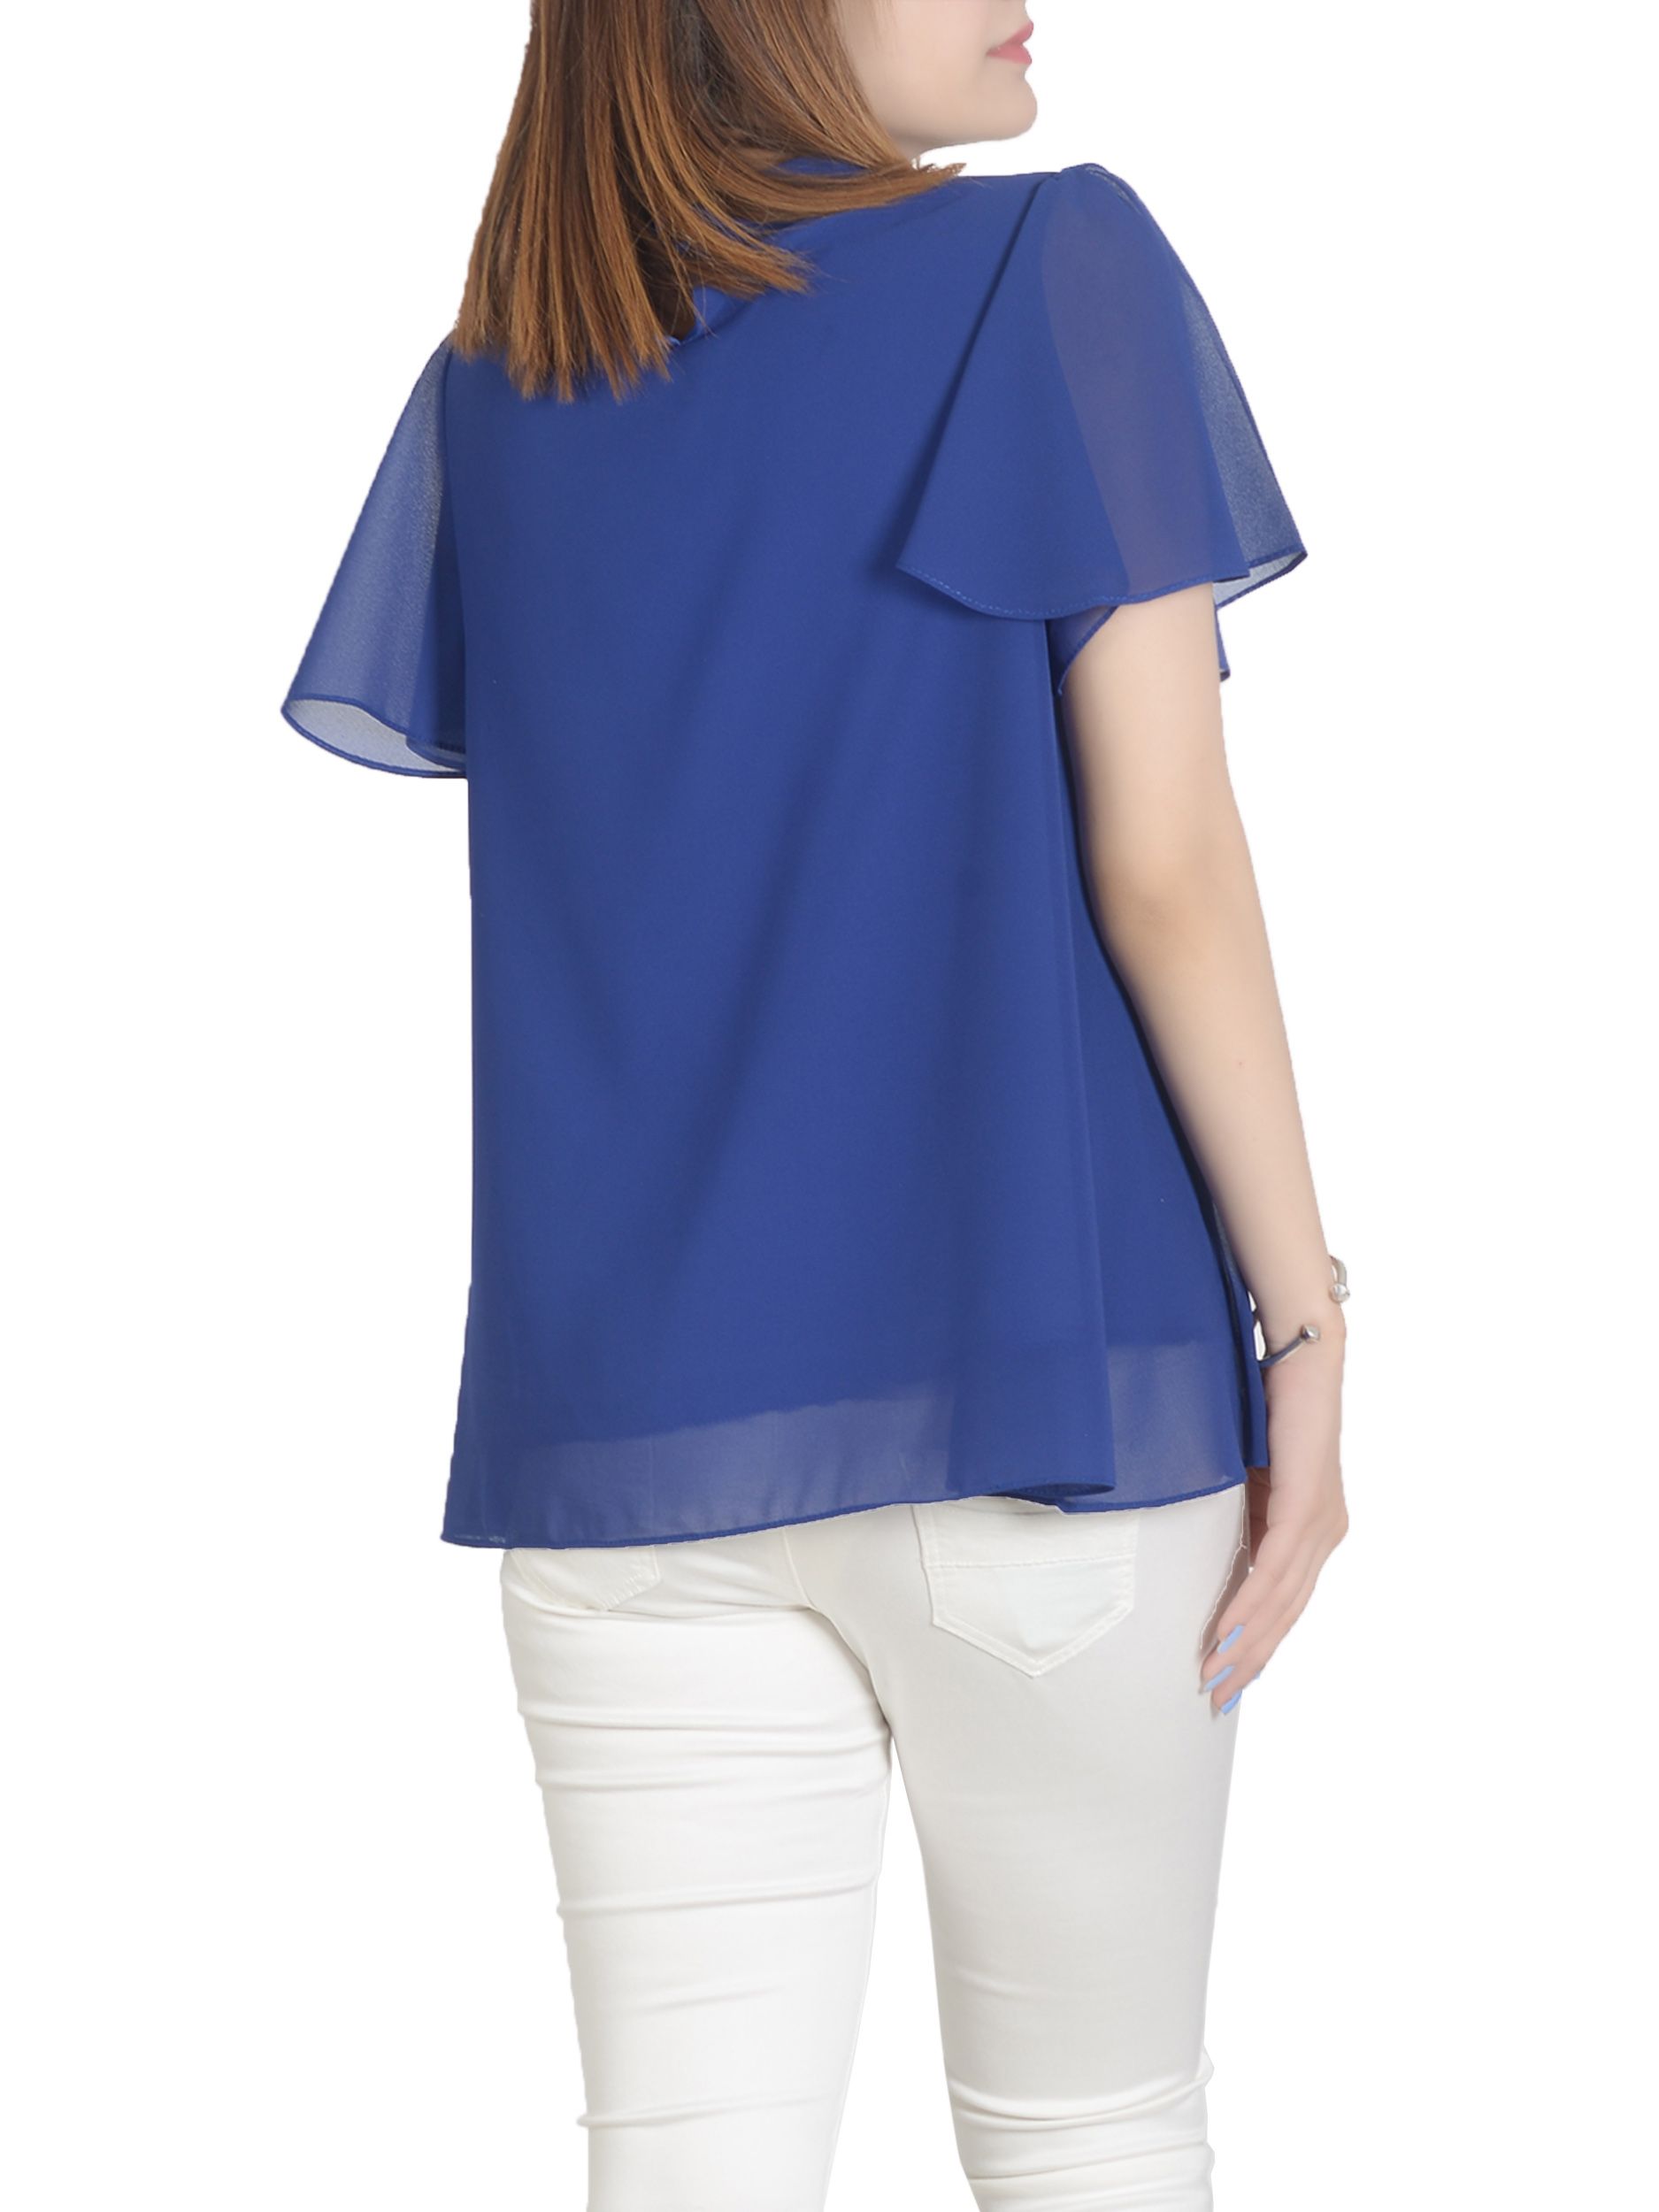 Plain blue short ready to wear shirt by lime light top collection 2019